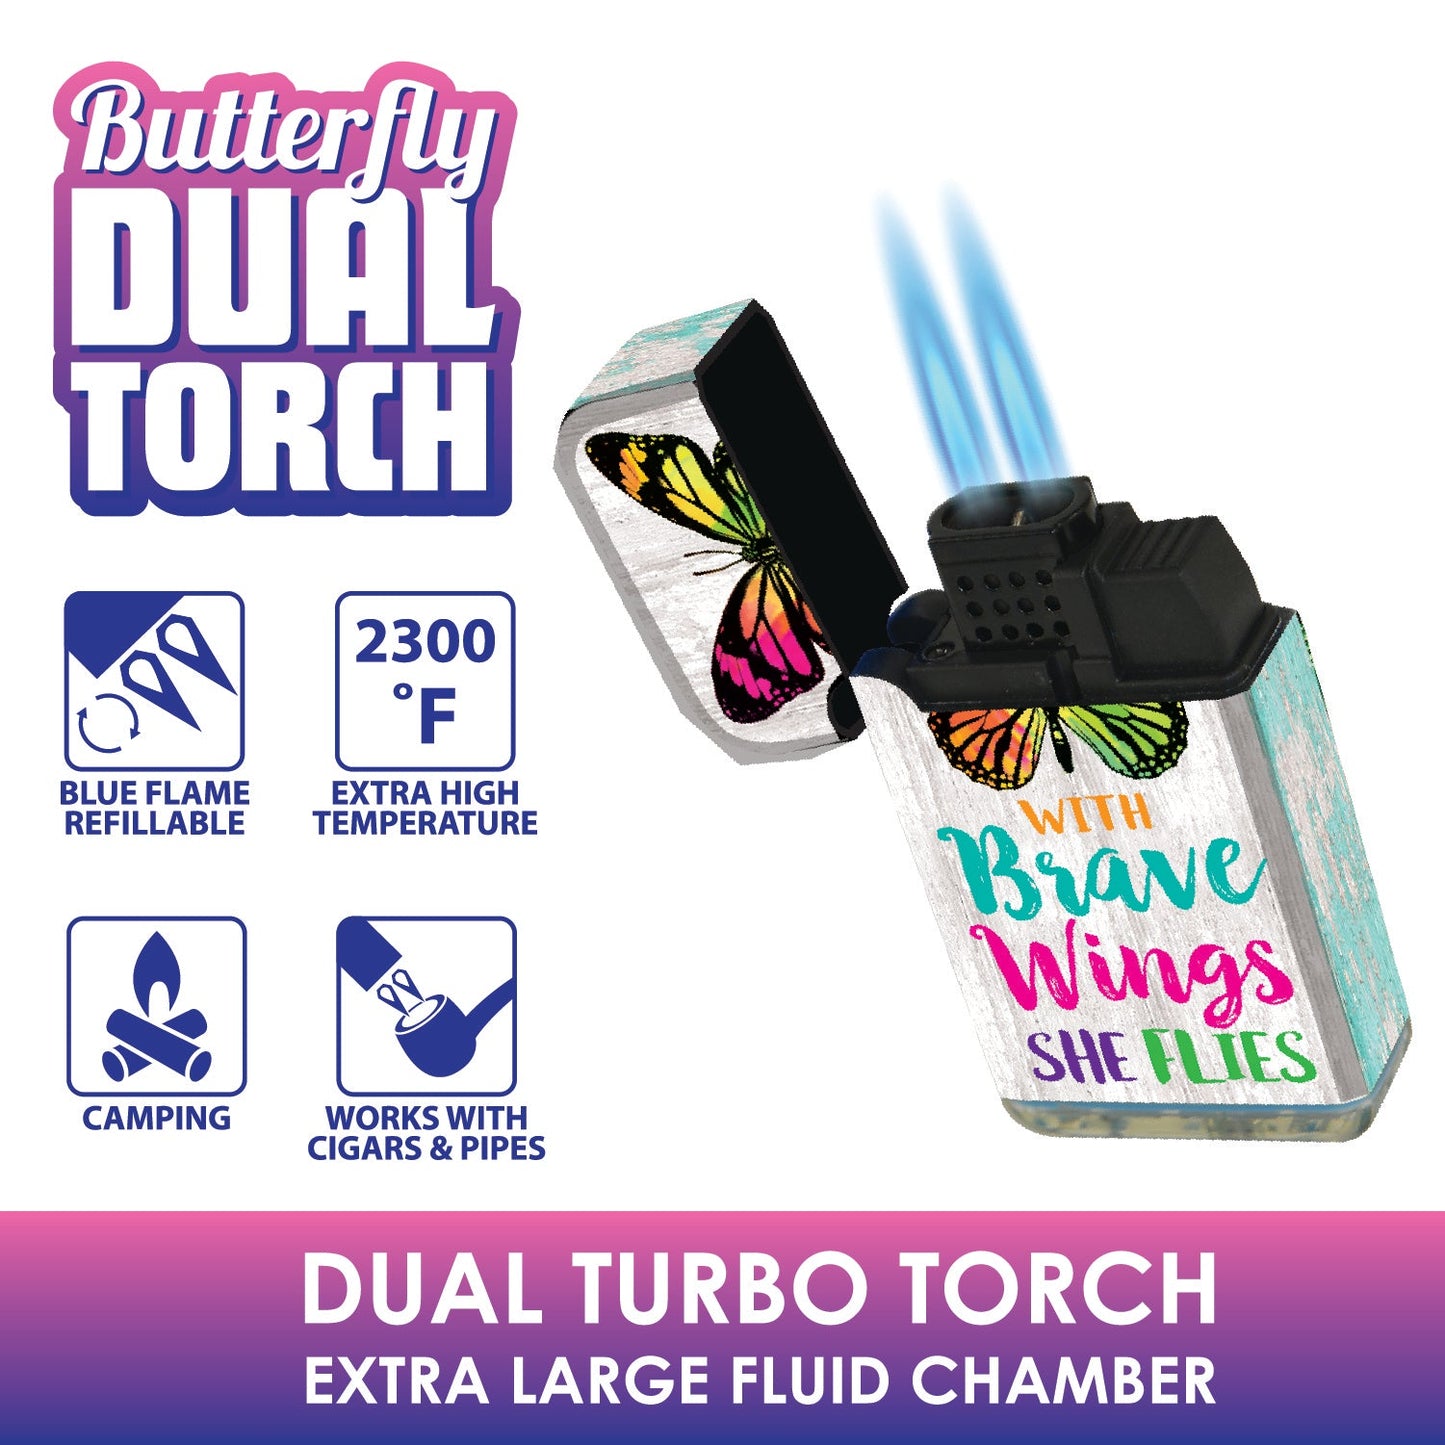 ITEM NUMBER 022336 BUTTERFLY DUAL TORCH 12 PIECES PER DISPLAY